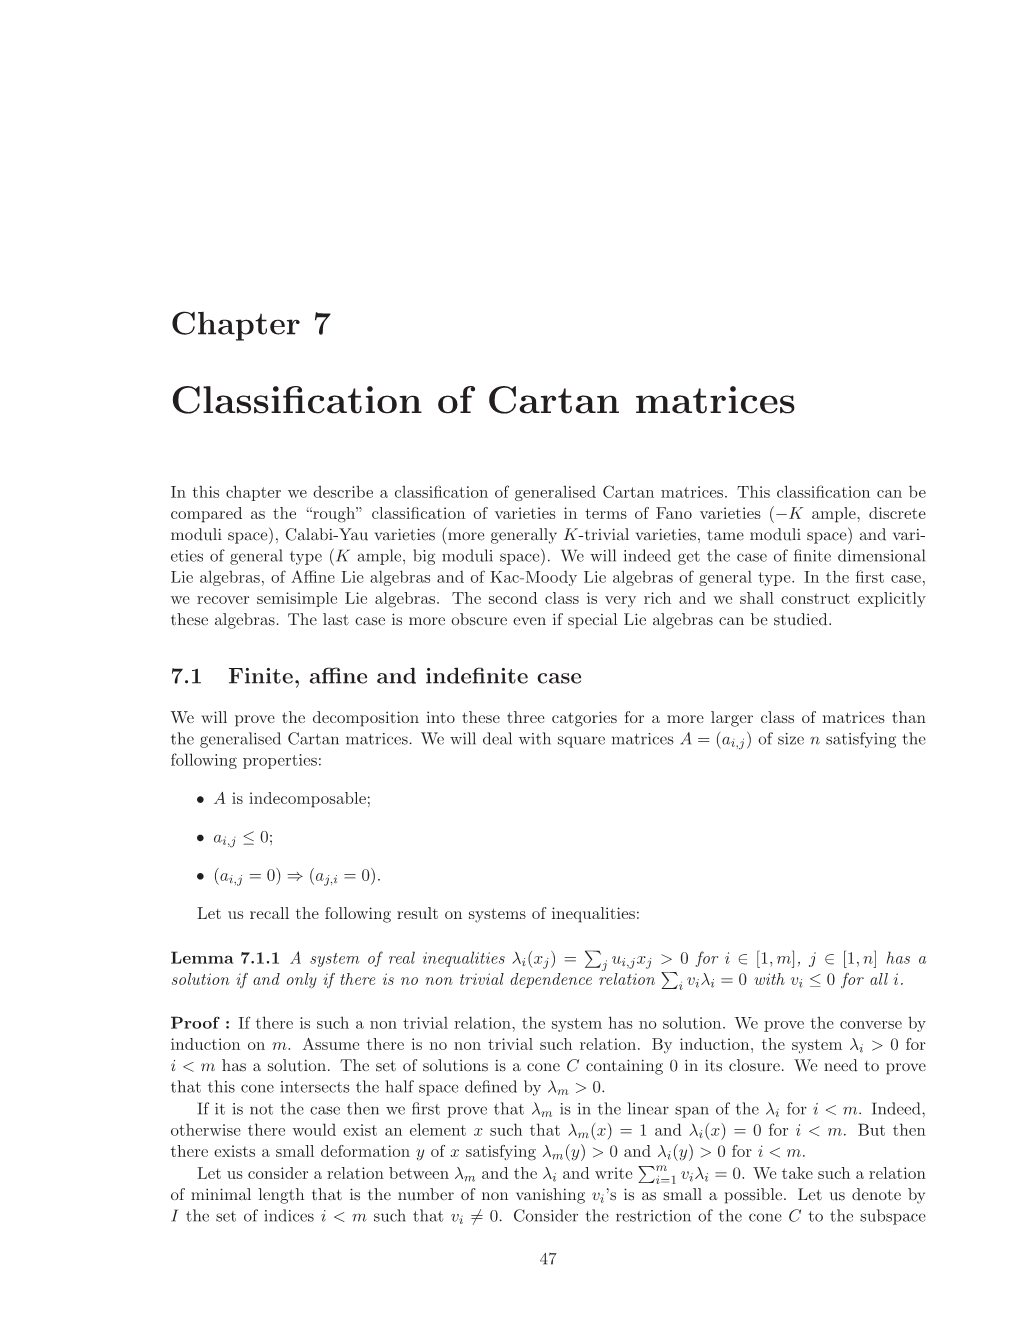 Classification of Cartan Matrices